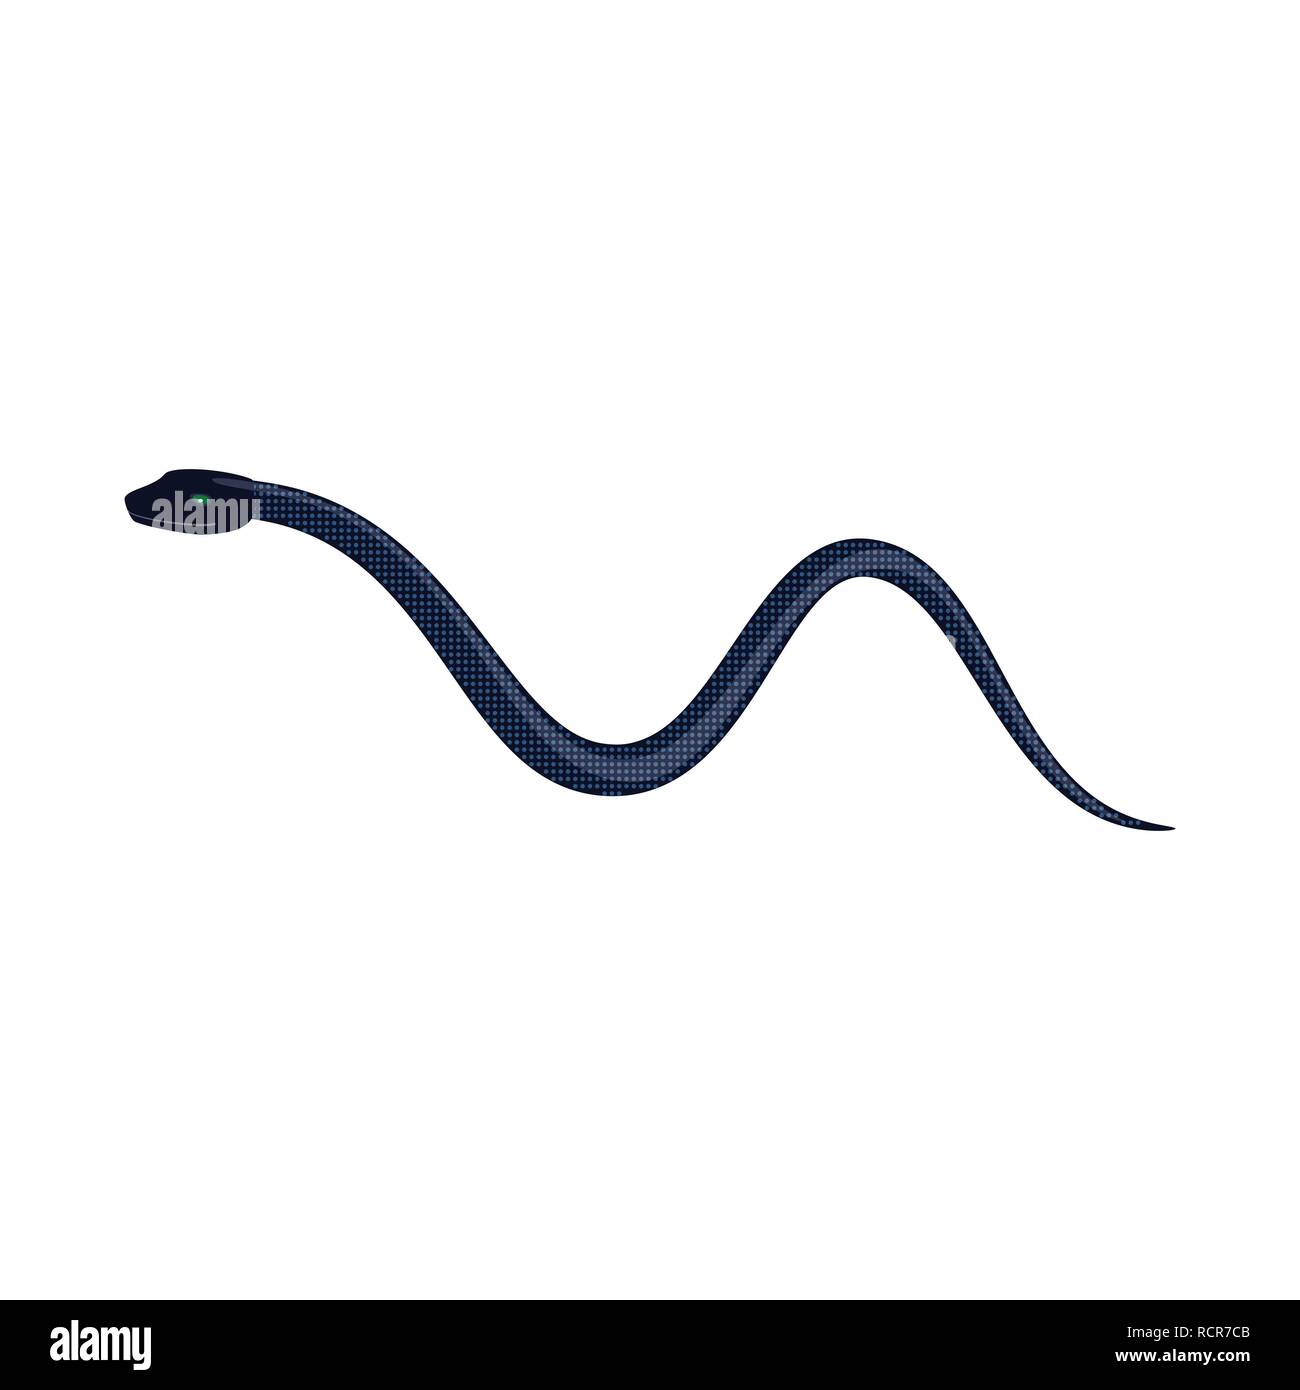 snake,tail,spiral,forest,leather,creeping,threat,throw,blue,animal